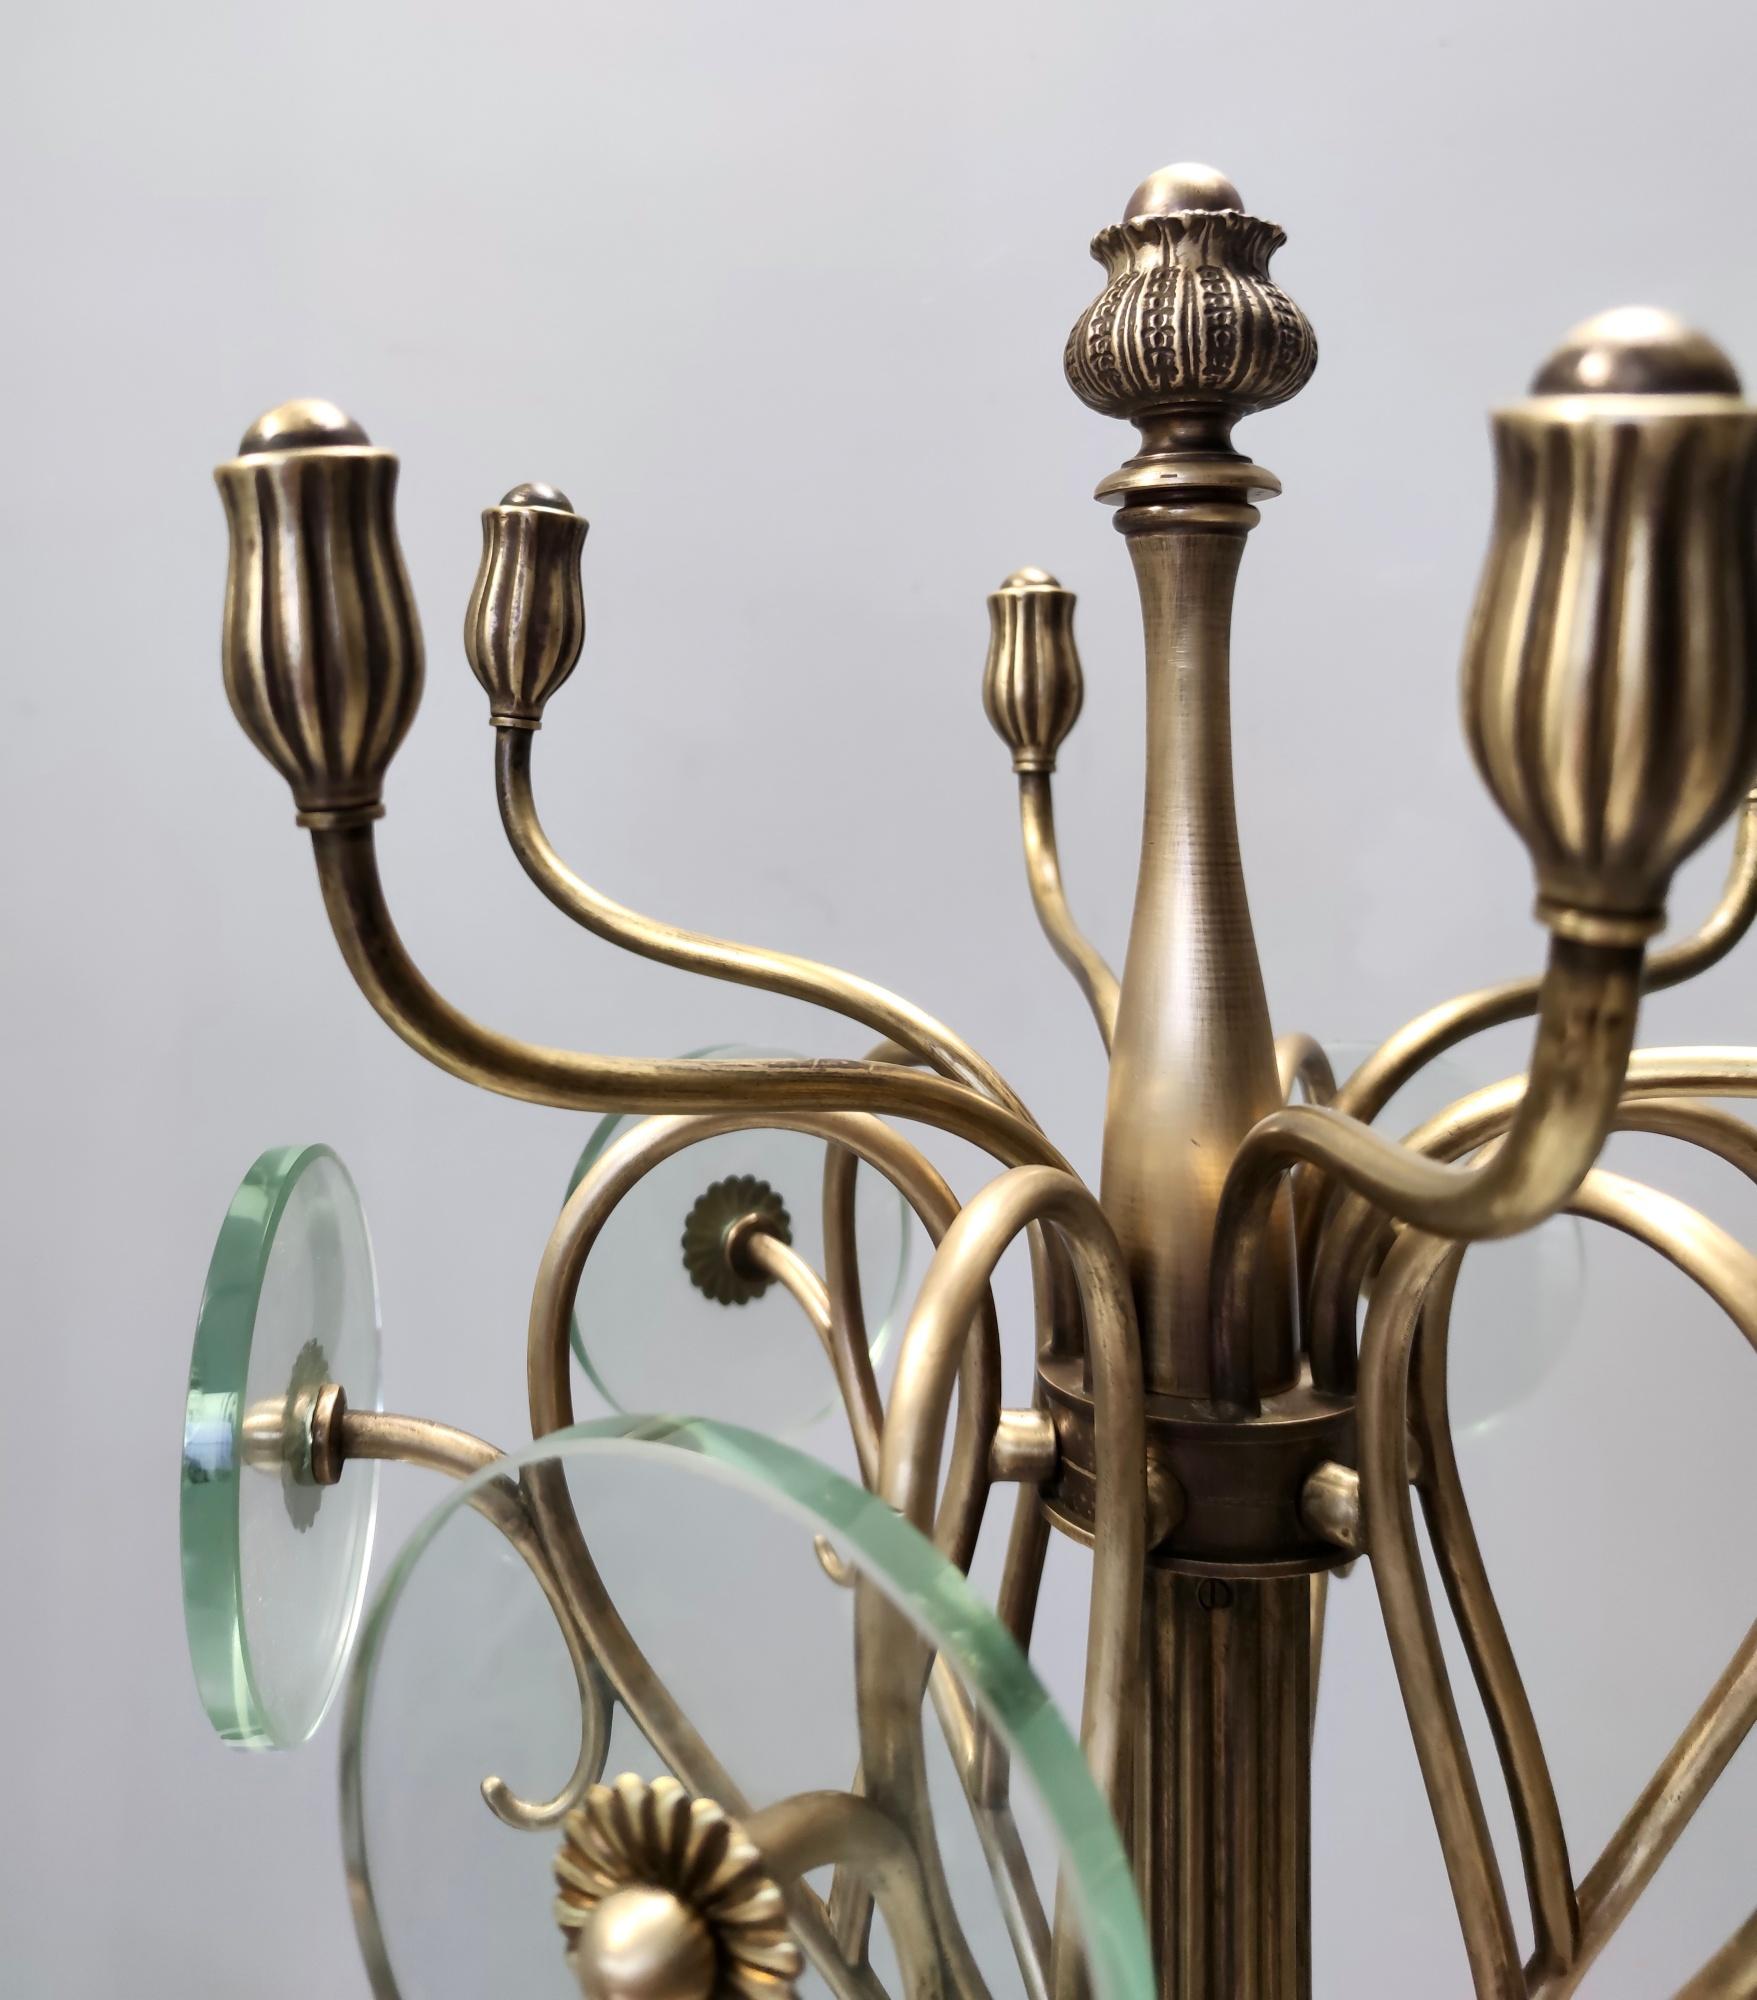 Vintage Revolving Brass and Glass Coat Rack Ascribable to Fontana Arte, Italy For Sale 2